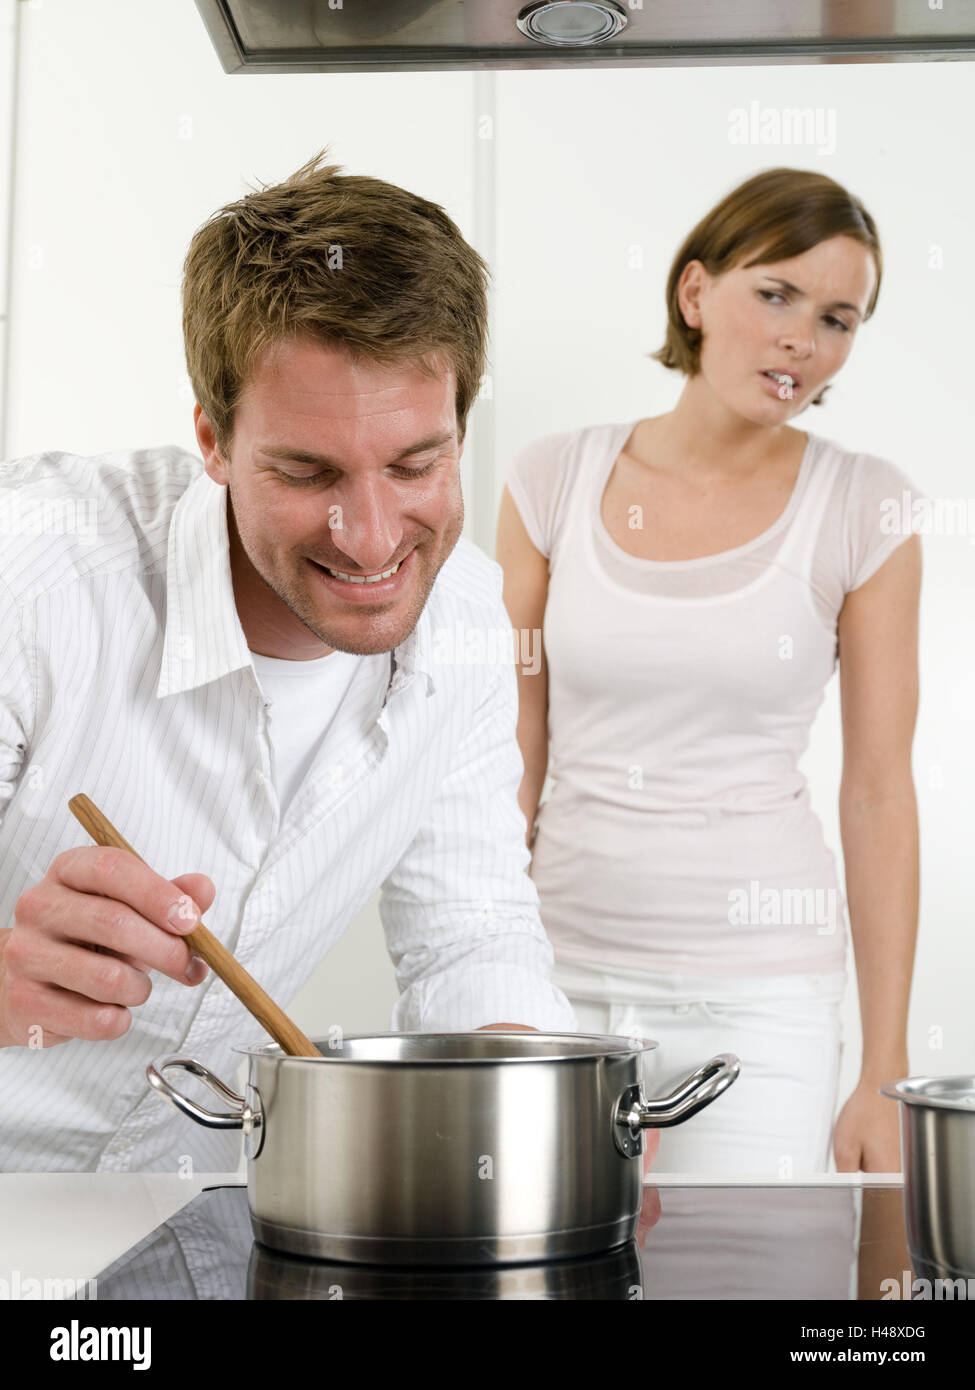 Couple, young, cooking, cuisine, saucepan, doubtfully Stock Photo